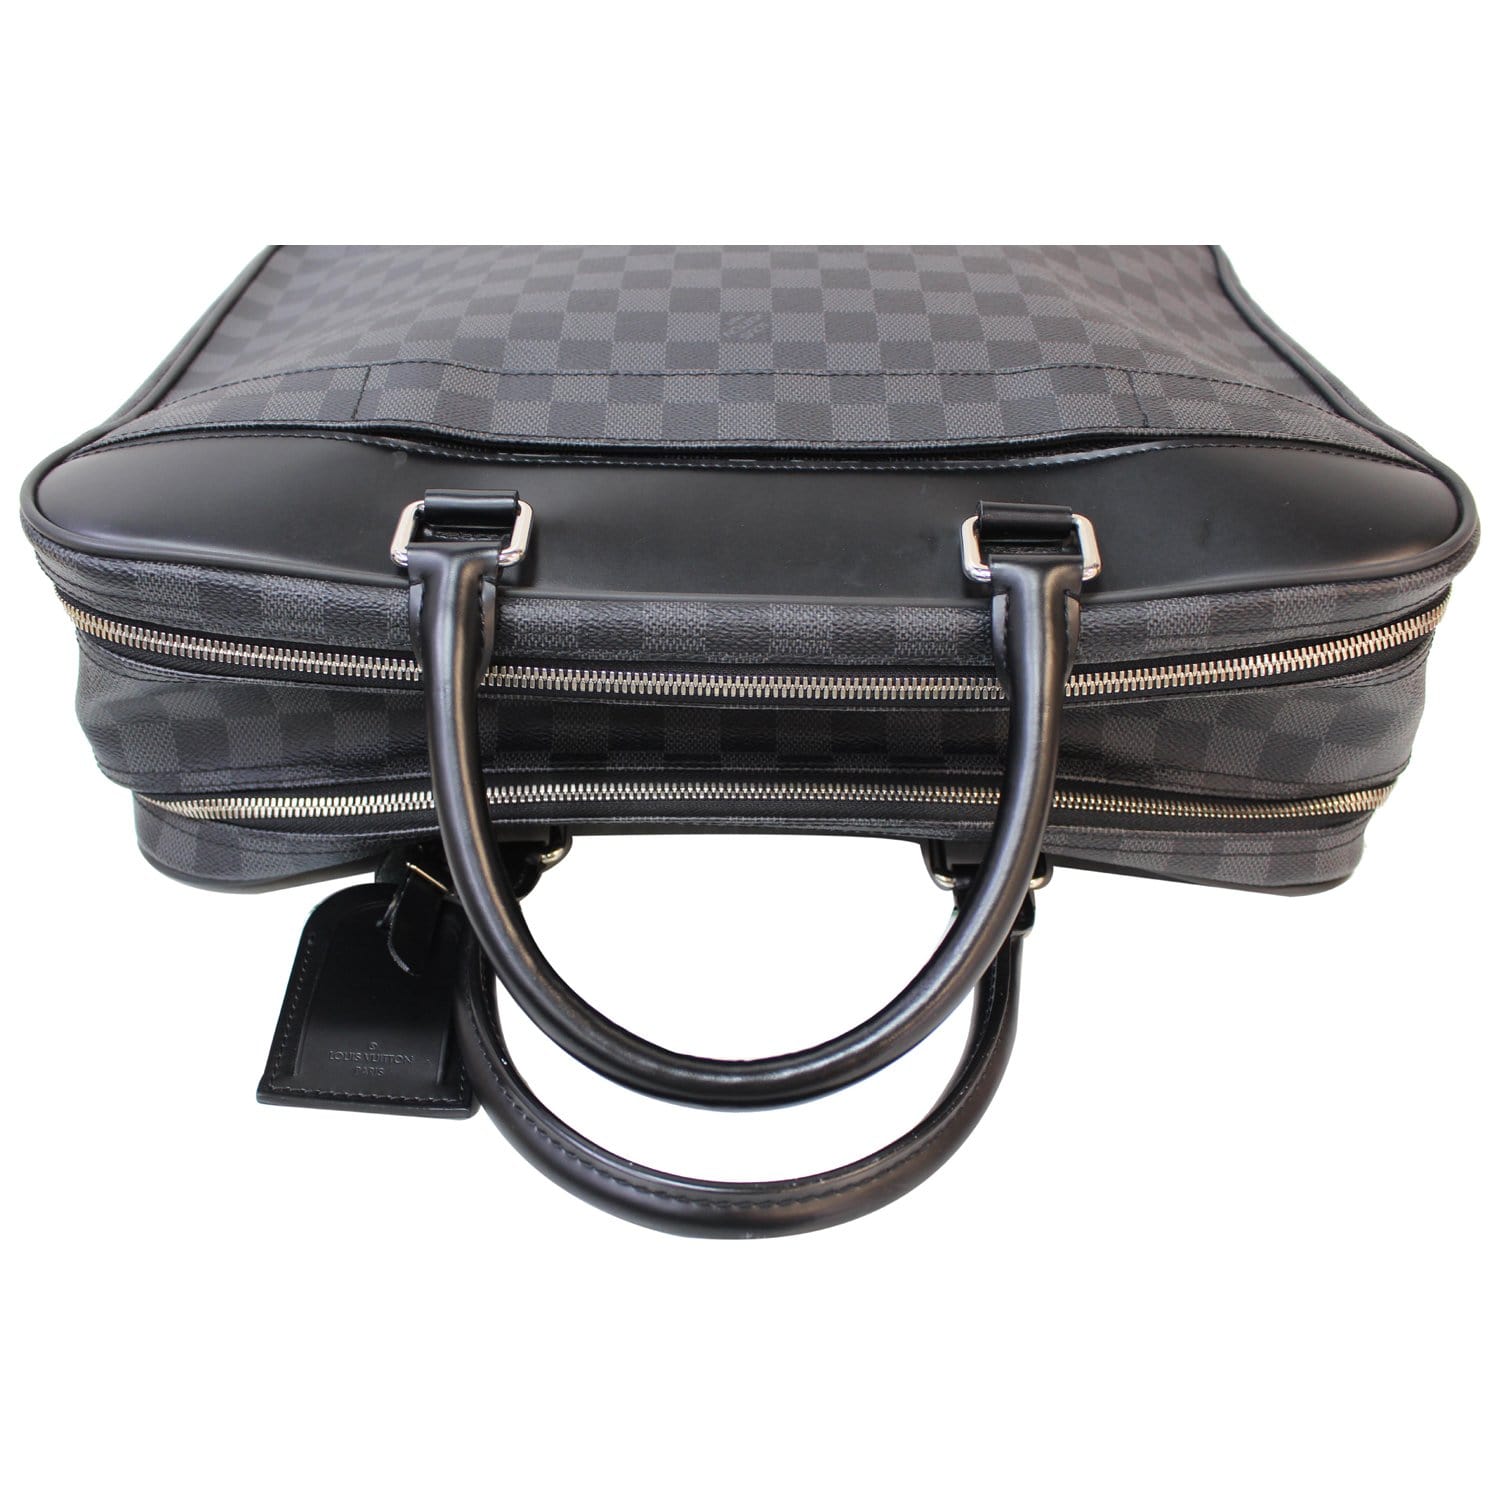 At Auction: A Louis Vuitton Damier Graphite Keepall weekender bag